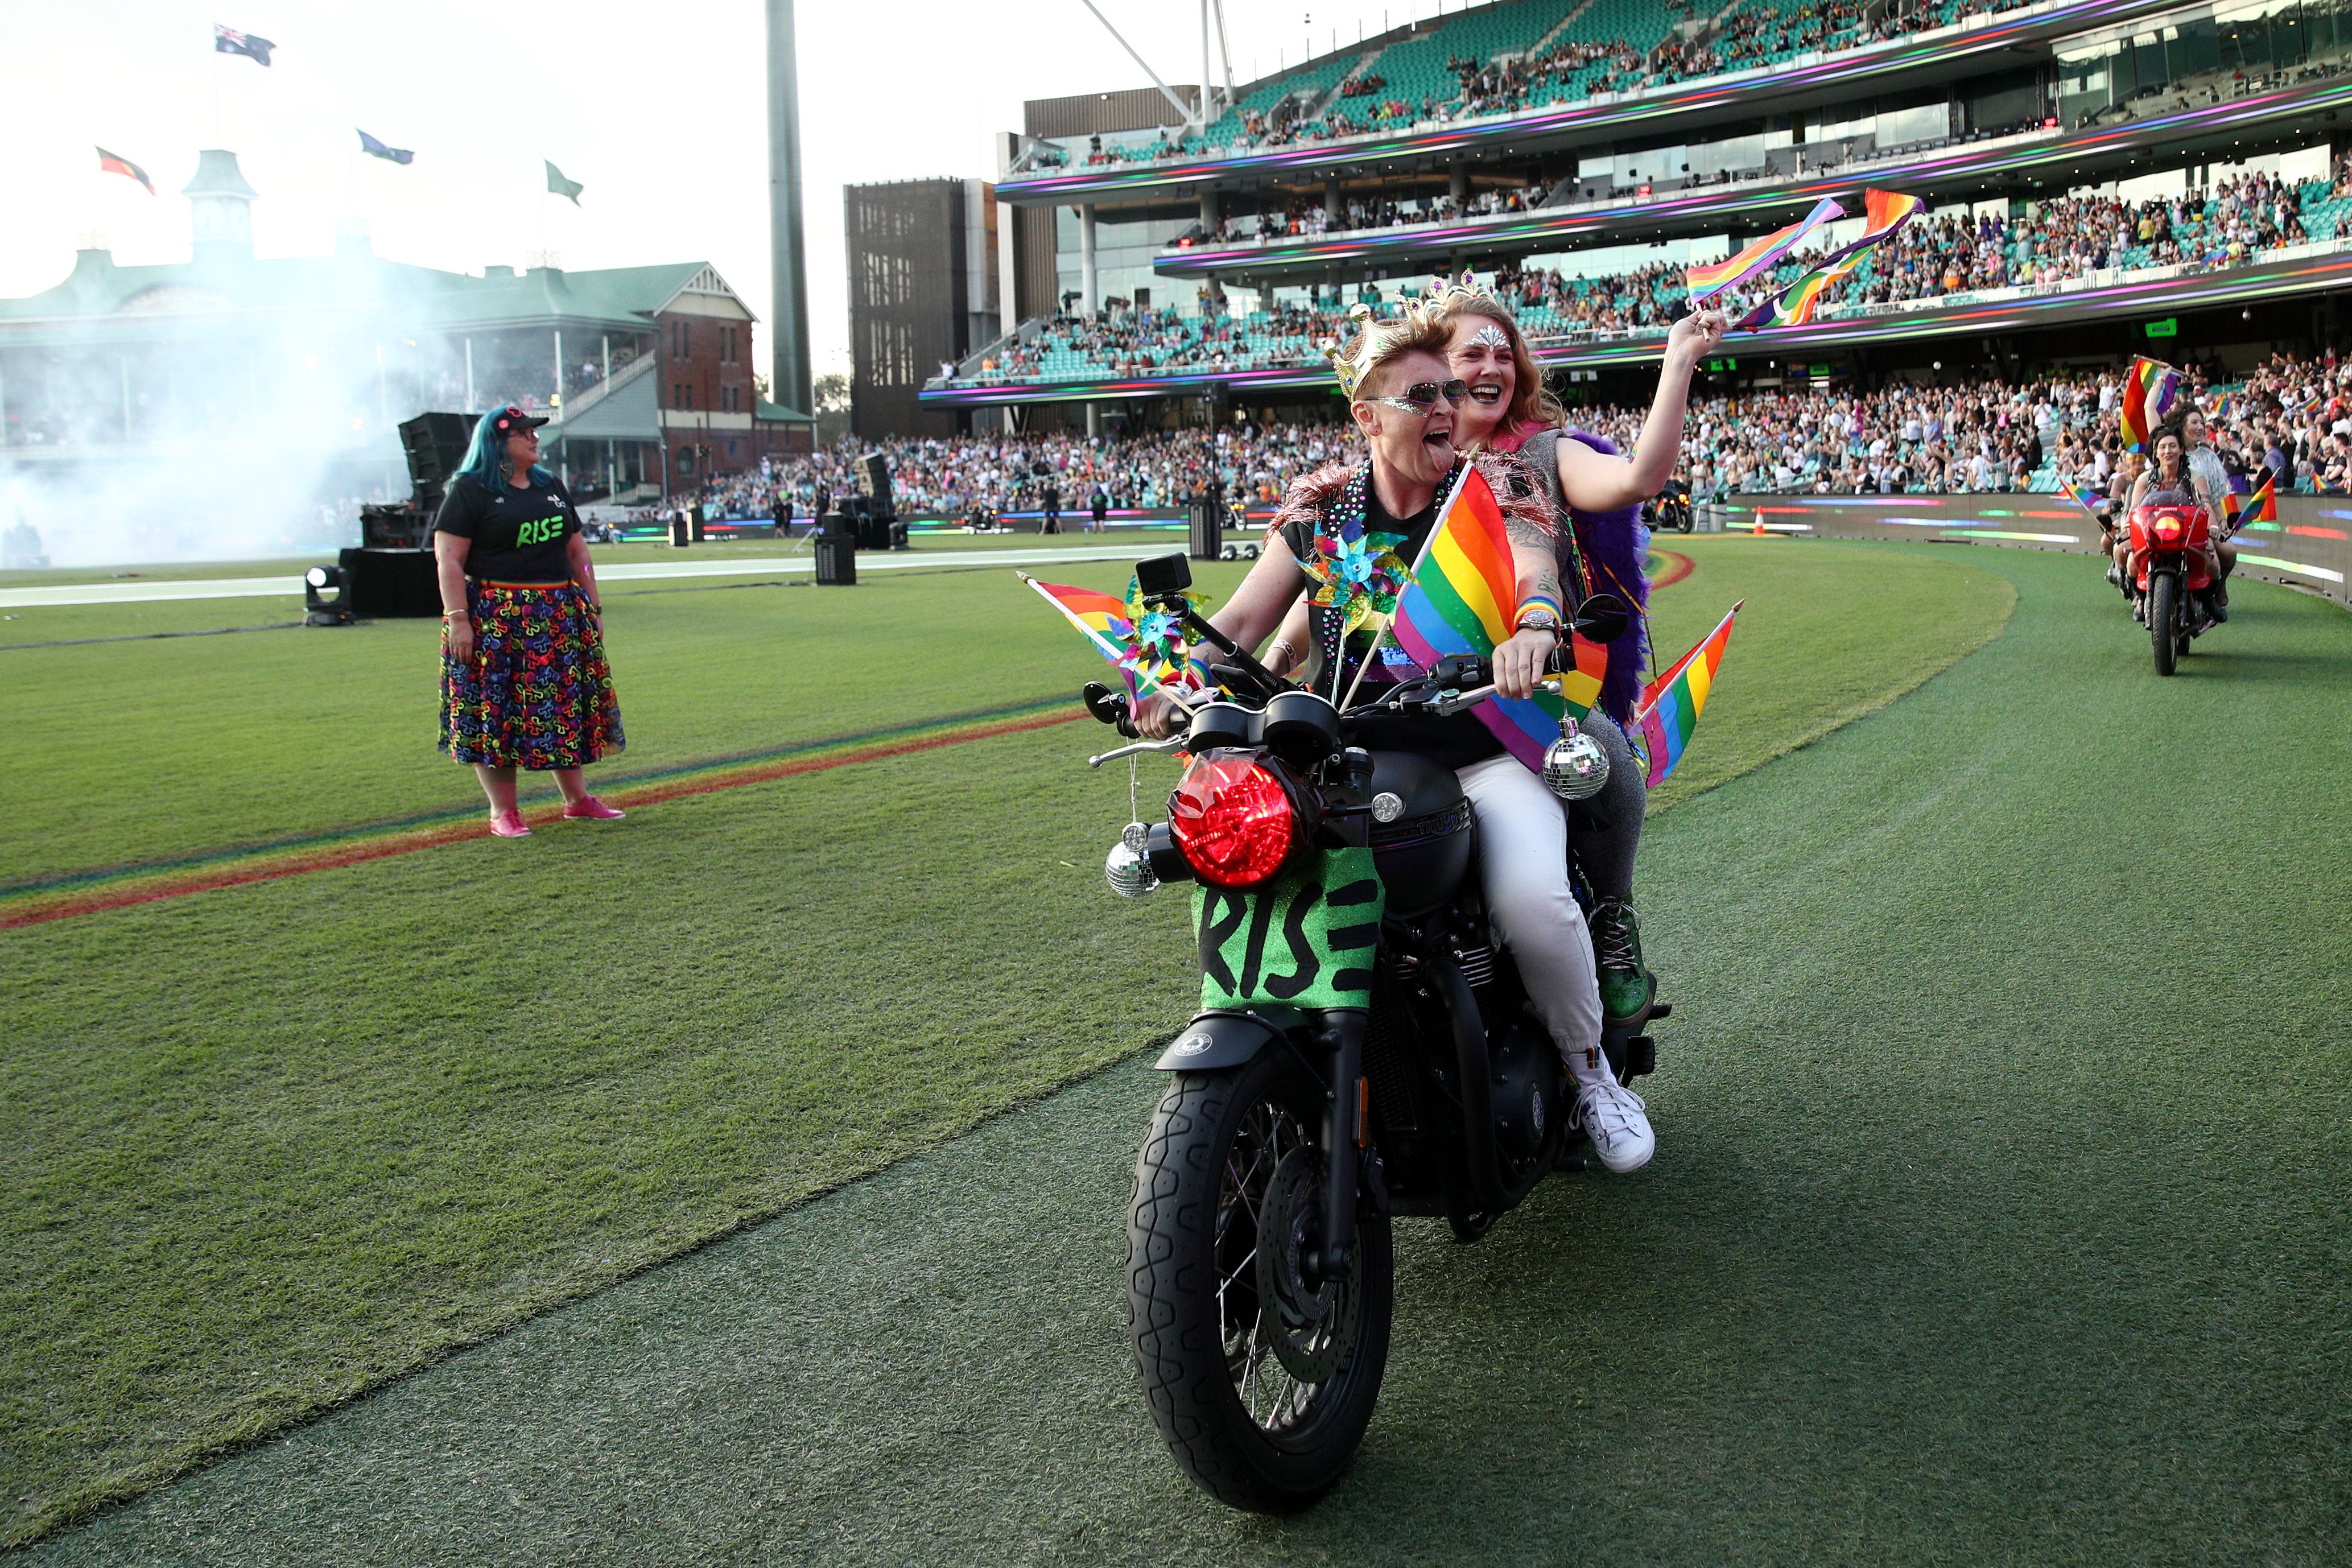 Parade goers take part in the 43rd Sydney Gay and Lesbian Mardi Gras Parade at the SCG on March 06